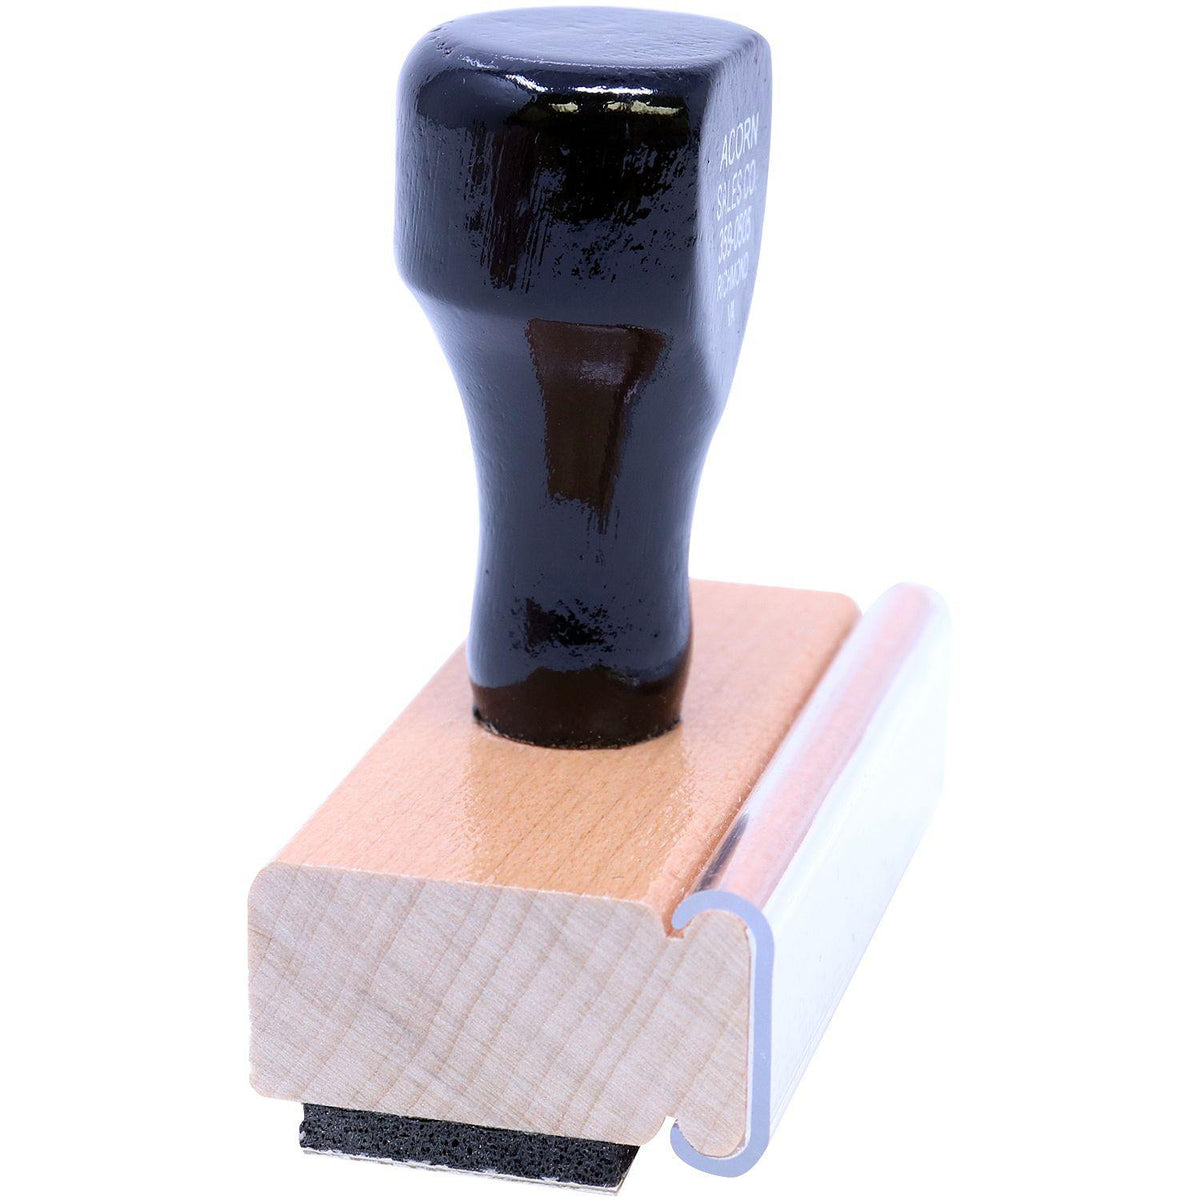 Narrow Font Urgent Rubber Stamp - Engineer Seal Stamps - Brand_Acorn, Impression Size_Small, Stamp Type_Regular Stamp, Type of Use_General, Type of Use_Office